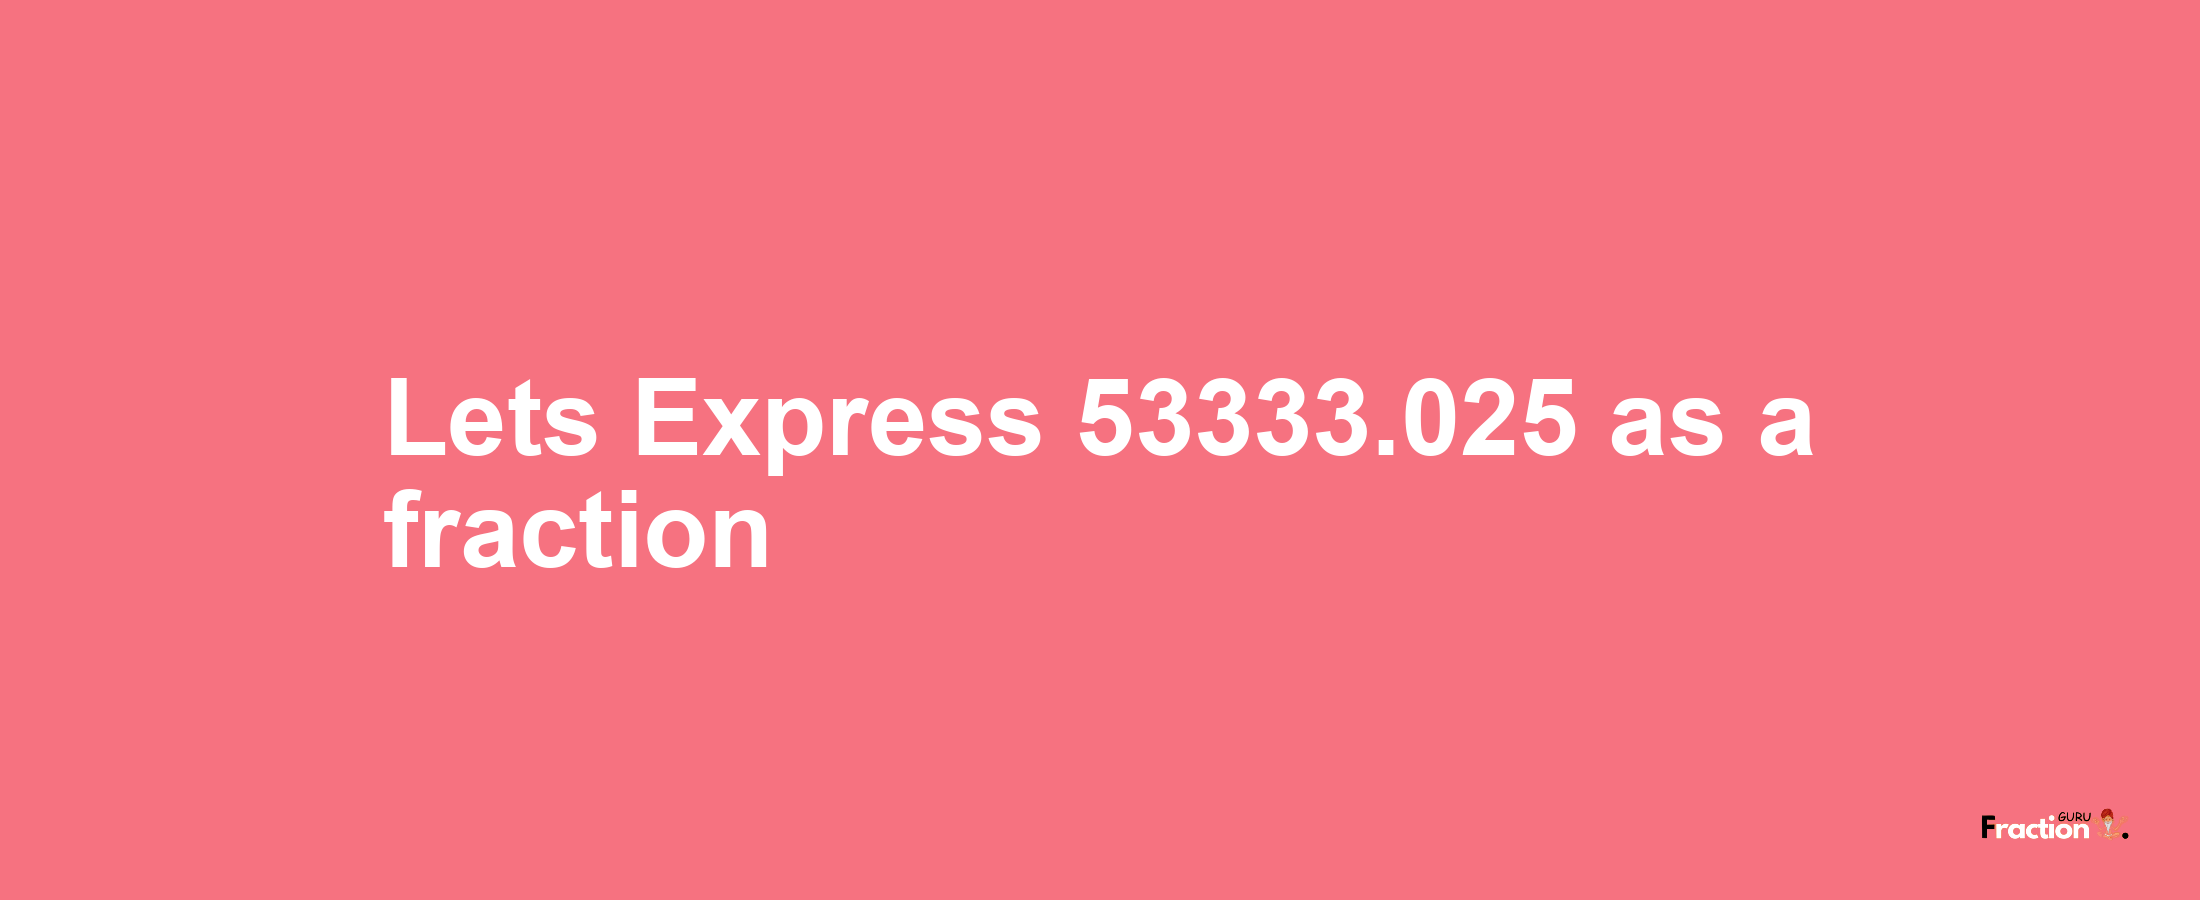 Lets Express 53333.025 as afraction